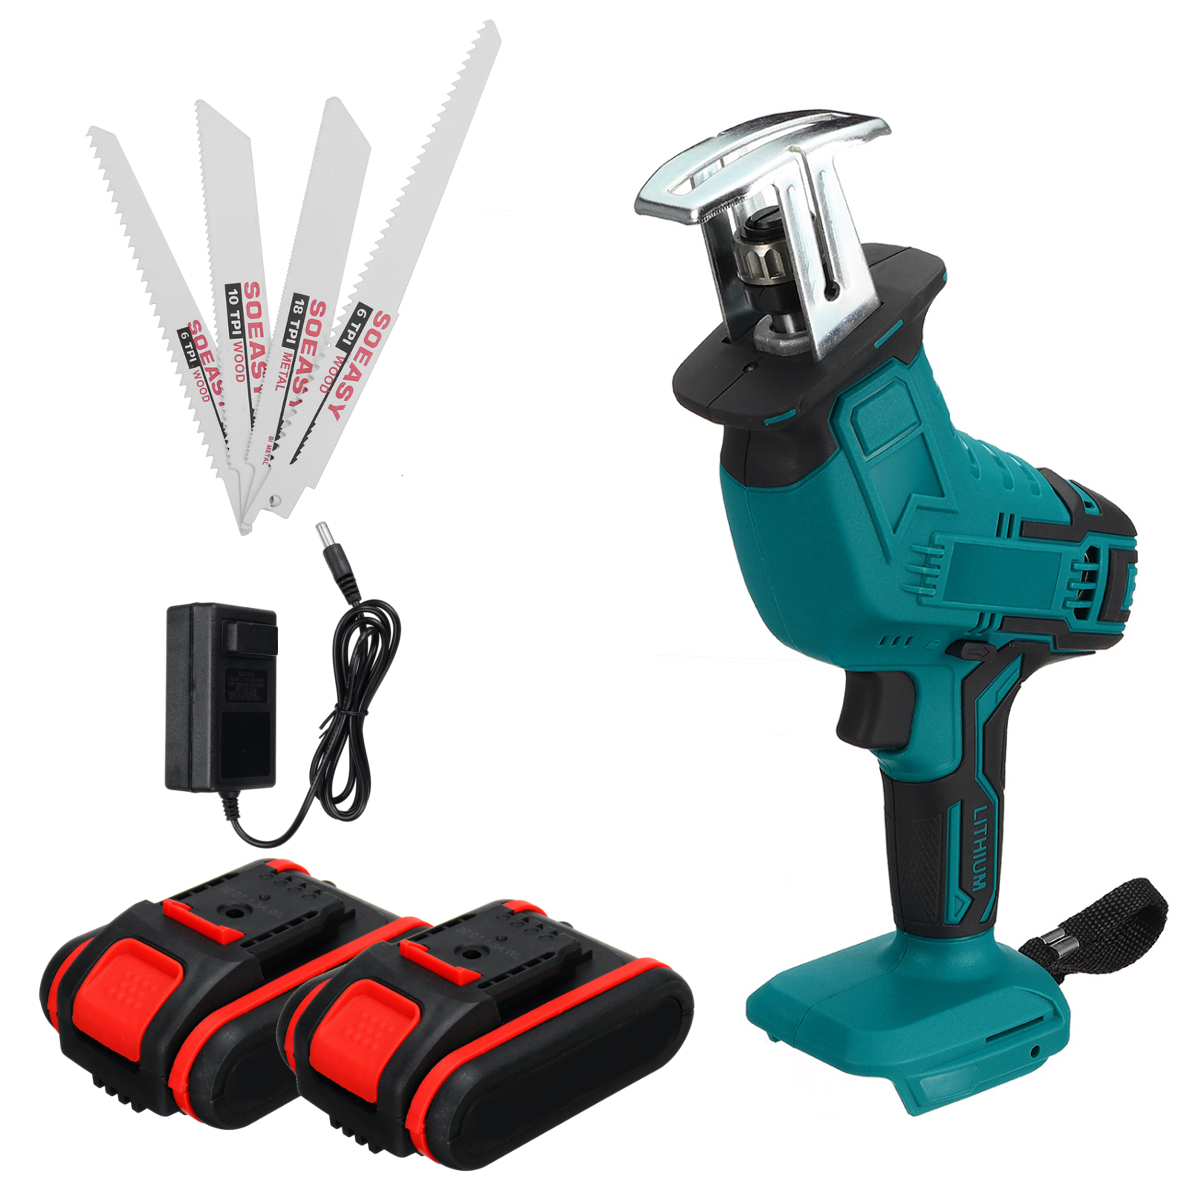 398VF-Reciprocating-Saw-Variable-Speed-Cordless-Electric-Saw-w-2-Batteries--4-Blades-Wood-Metal-Plas-1874646-12